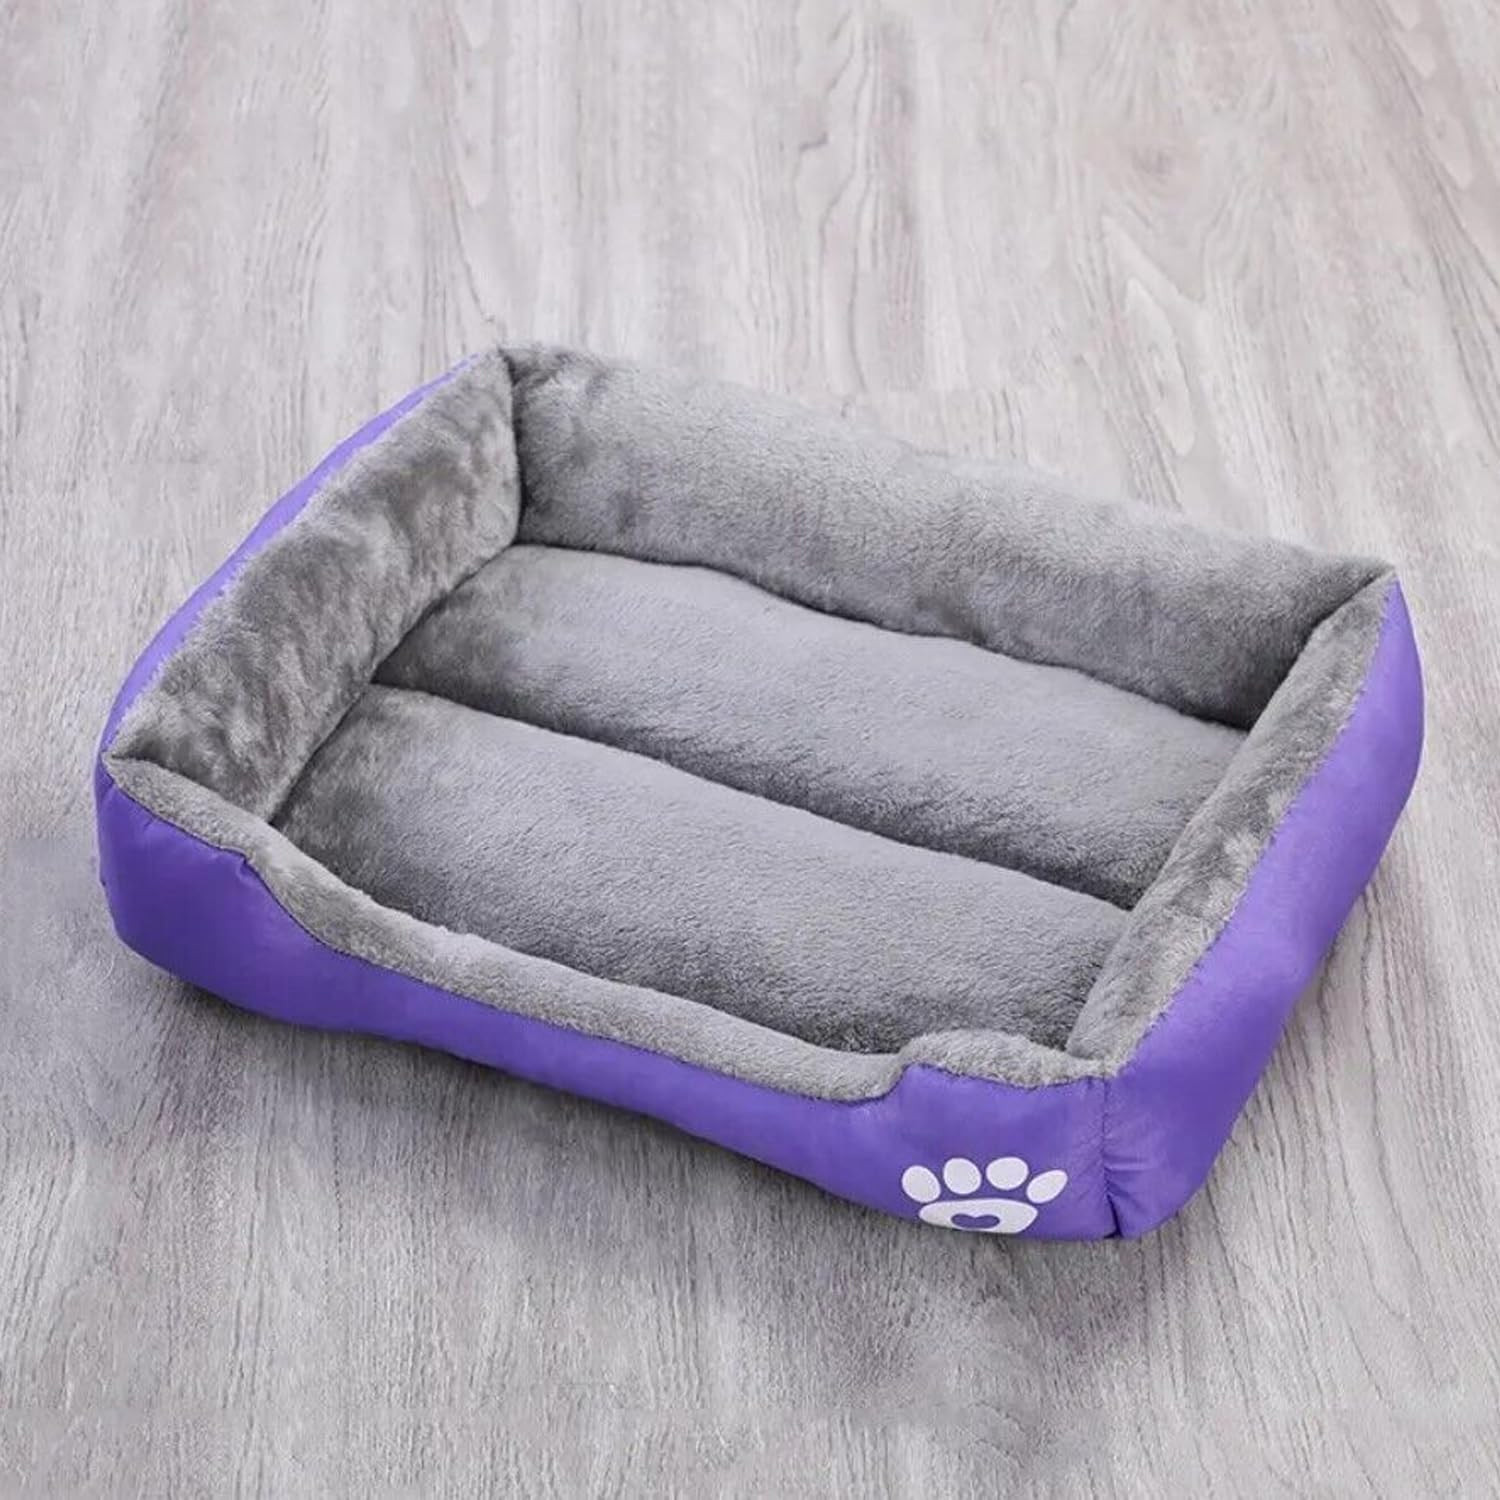 Kuber Industries Dog & Cat Bed|Super Soft Plush Top Pet Bed|Oxford Cloth Polyester Filling|Machine Washable Dog Bed|Rectangular Cat Bed with Rise-Edge Pillow|QY036P-S|Purple